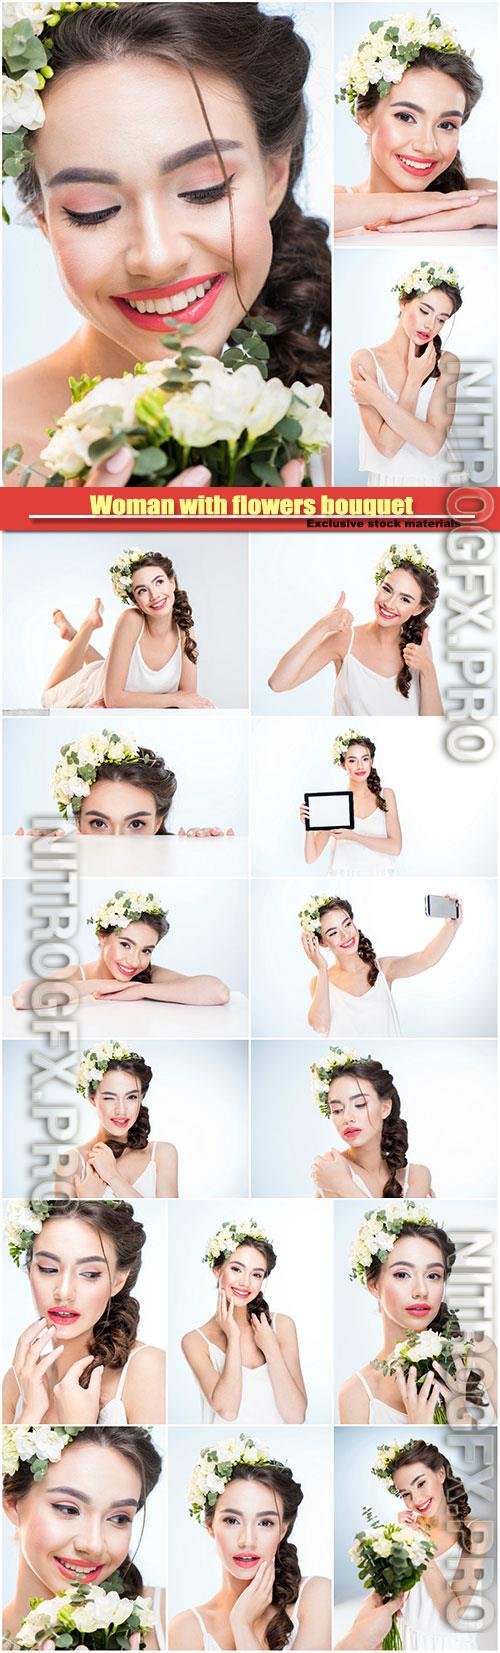 Girl with white flowers smiling